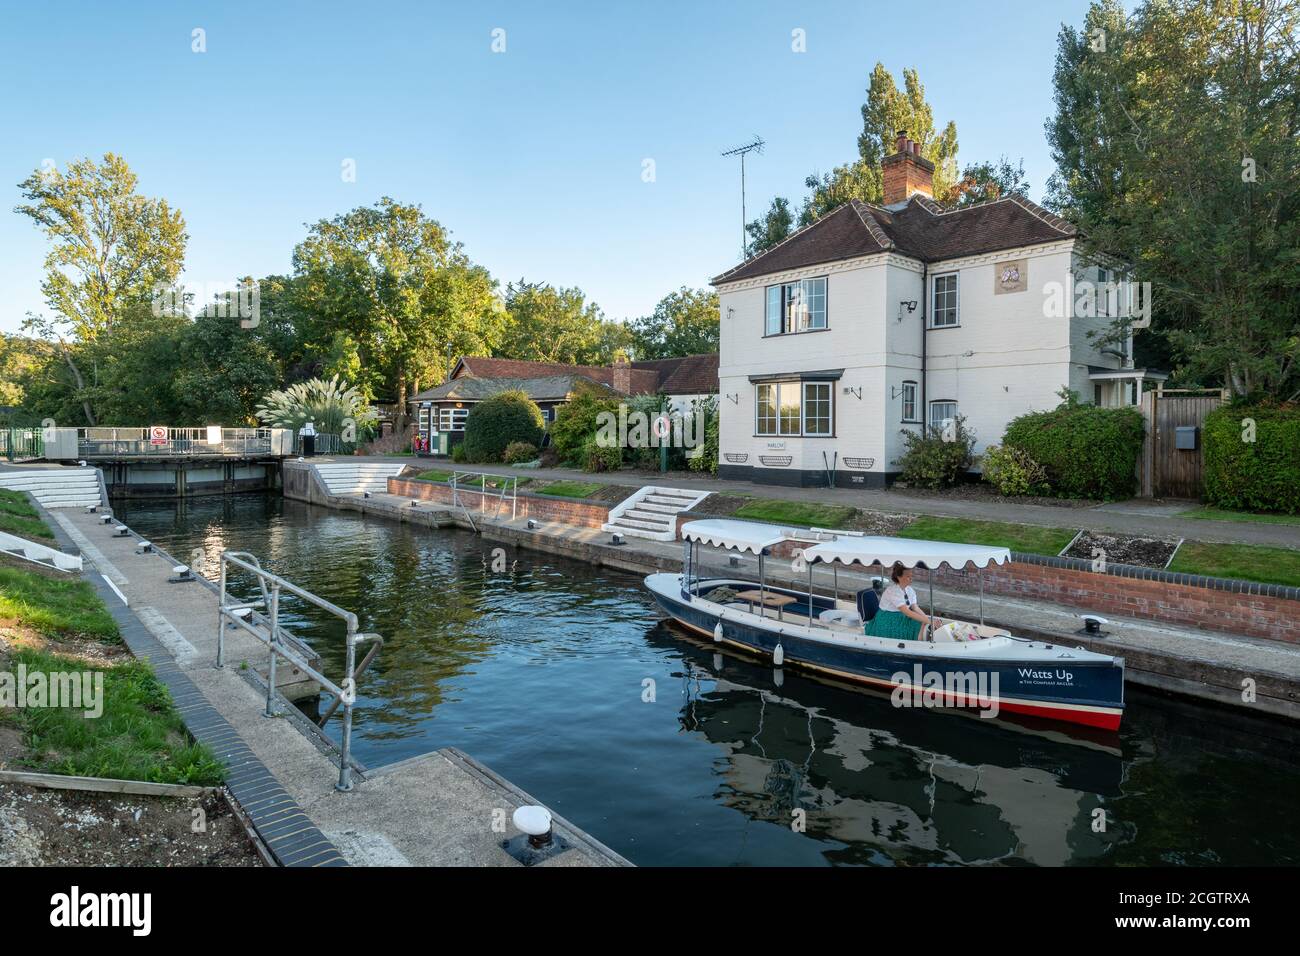 The lock at Marlow, a picturesque market town in Buckinghamshire, England, UK, on the River Thames Stock Photo